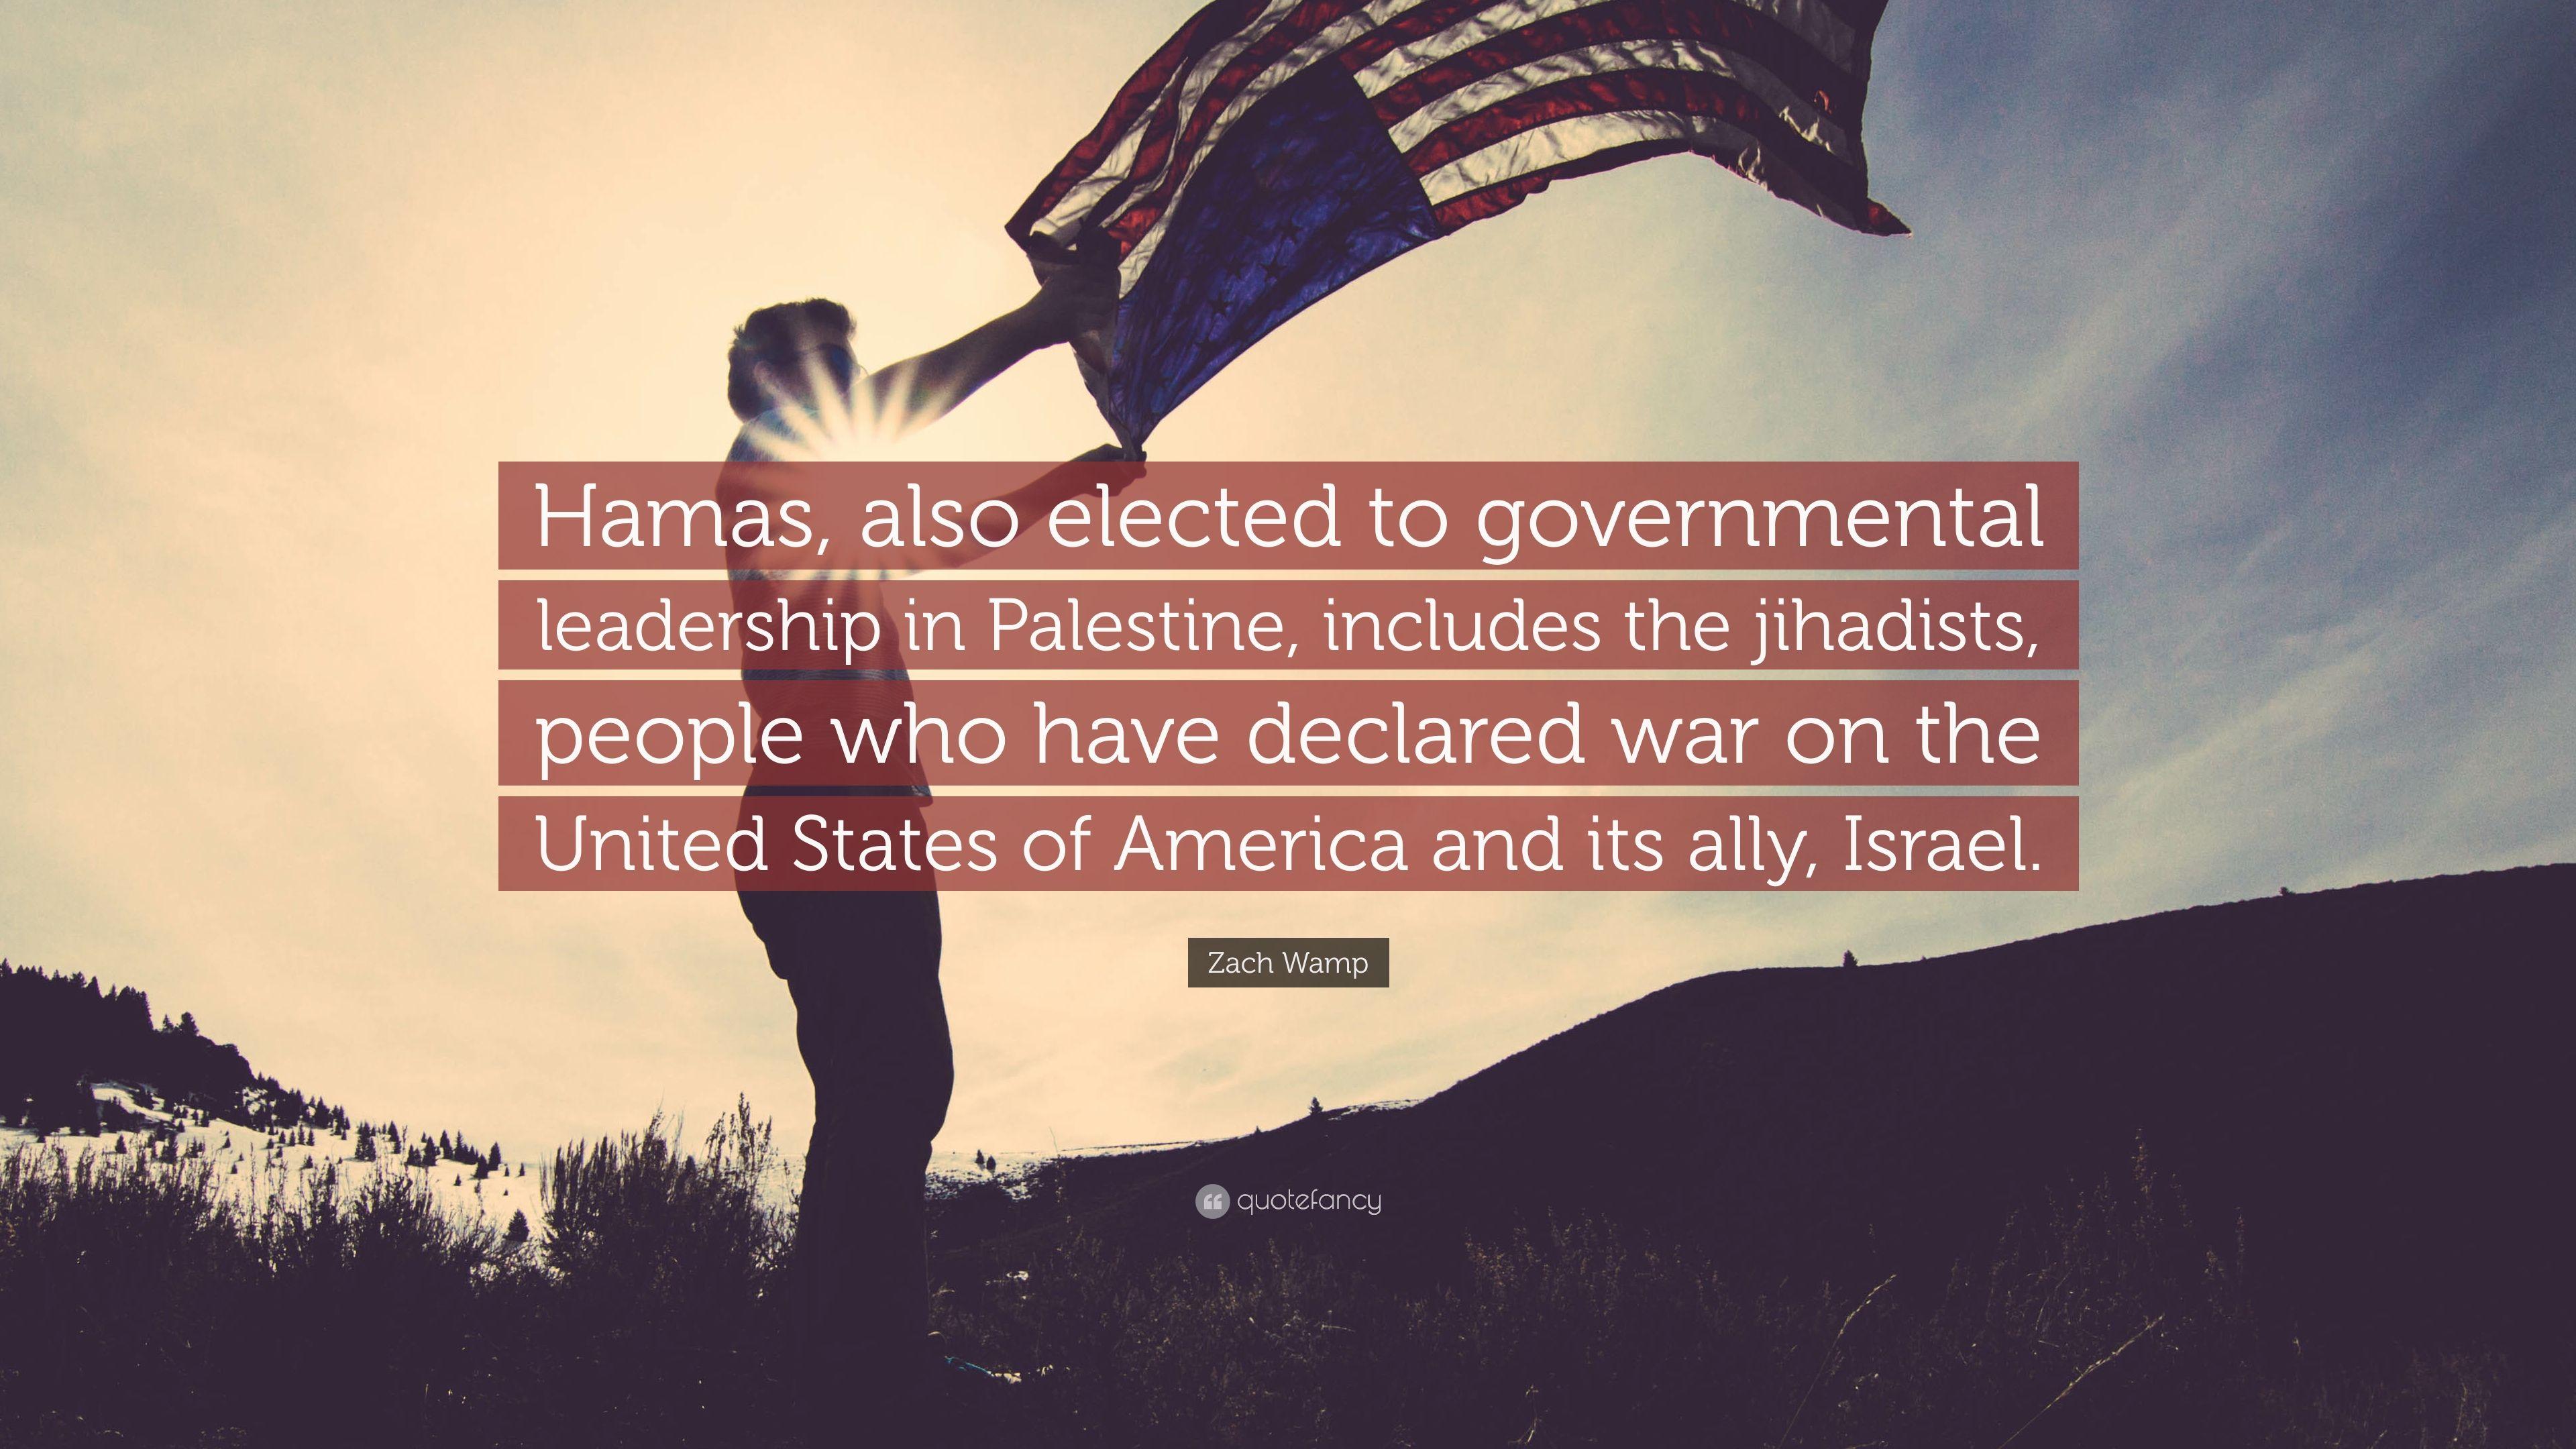 Zach Wamp Quote: “Hamas, also elected to governmental leadership